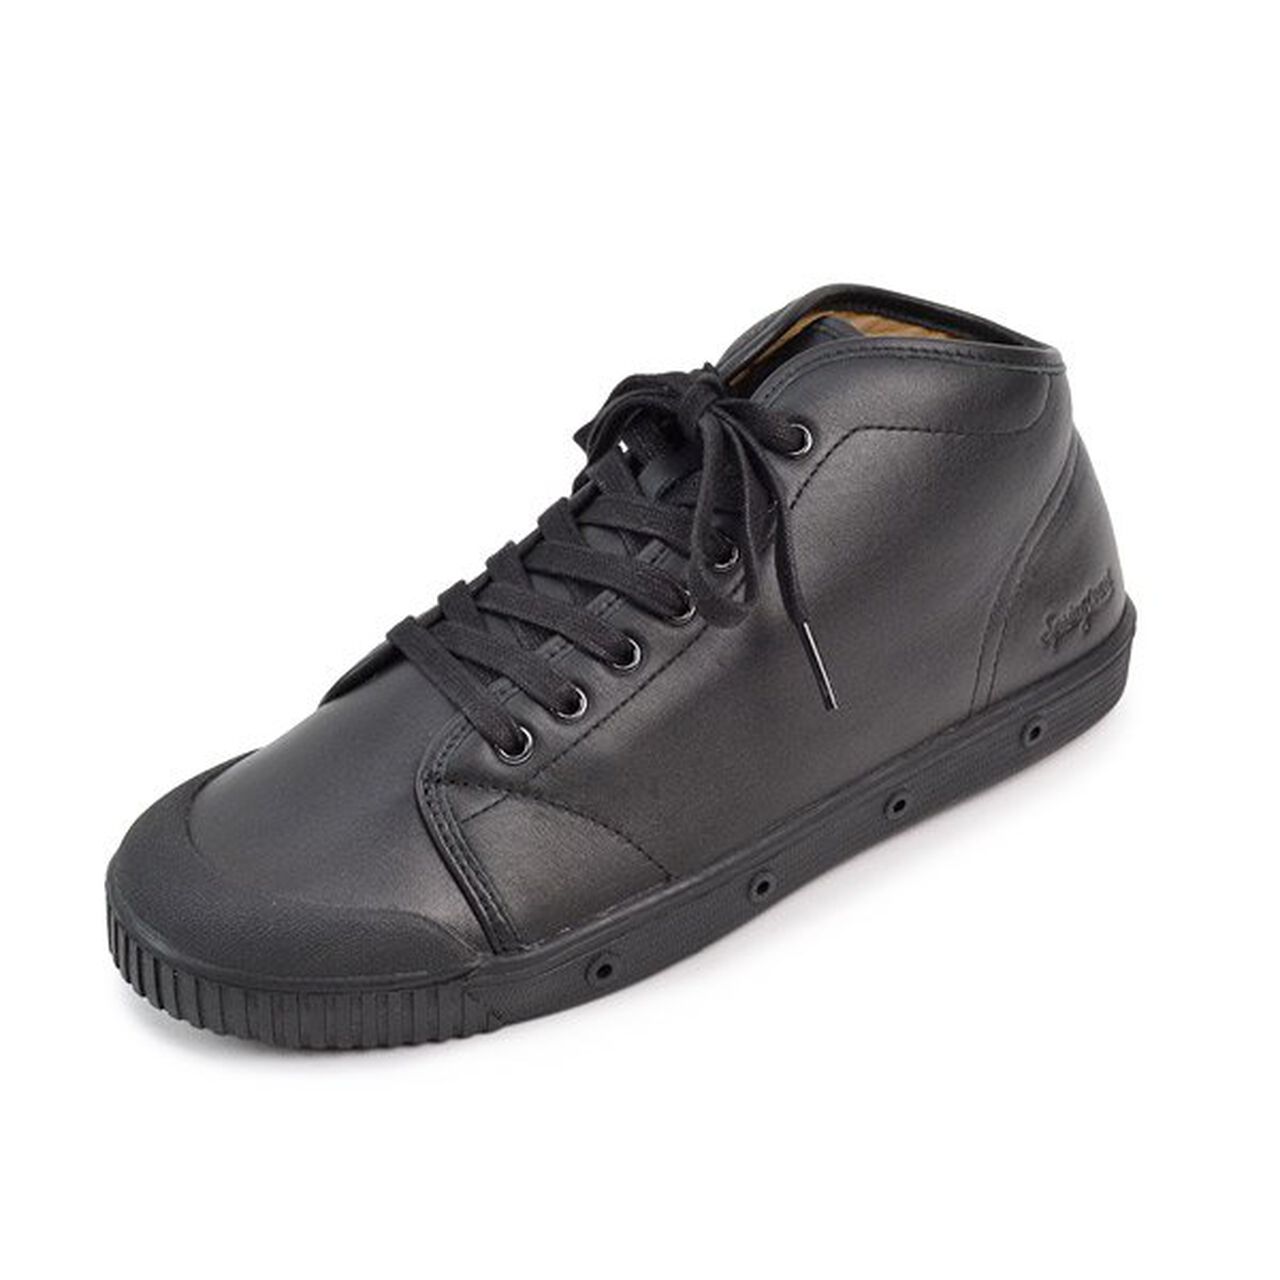 B2 Mid Cut Leather Sneakers,Black, large image number 0